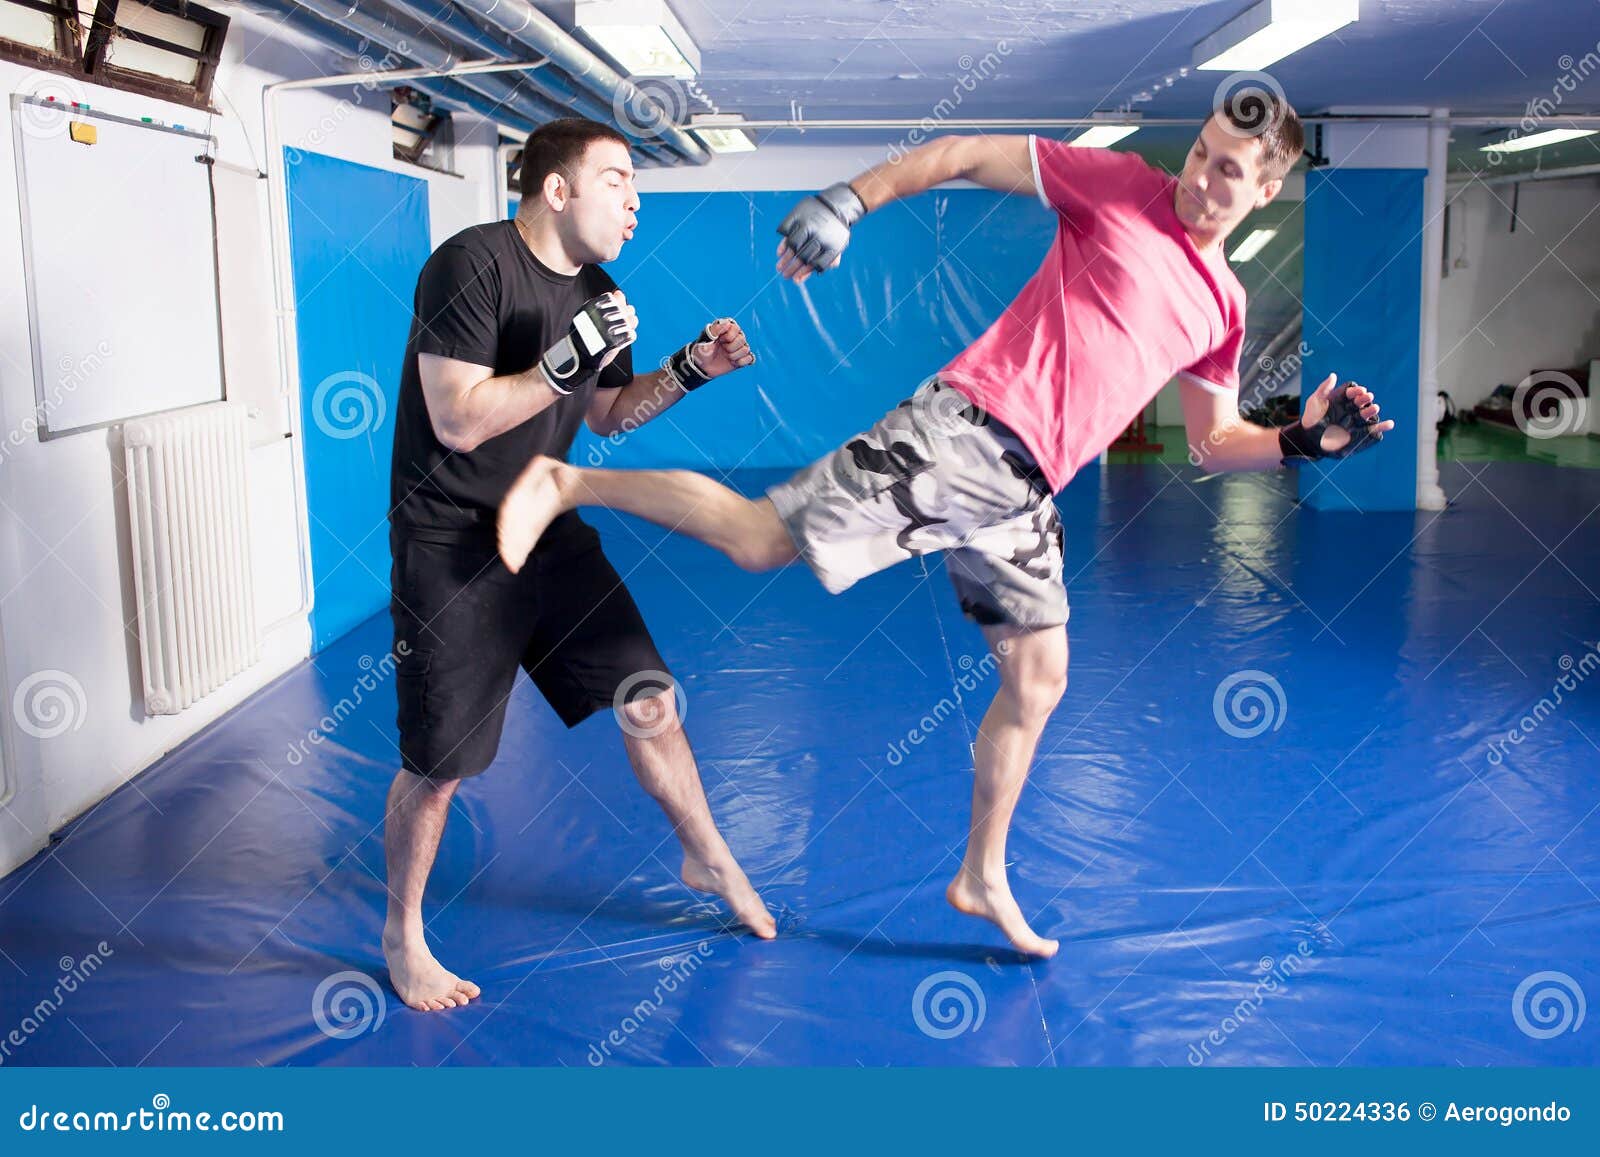 Leg Kick in the Belly during Martial Art Training Stock Photo - Image of  fighter, kick: 50224336